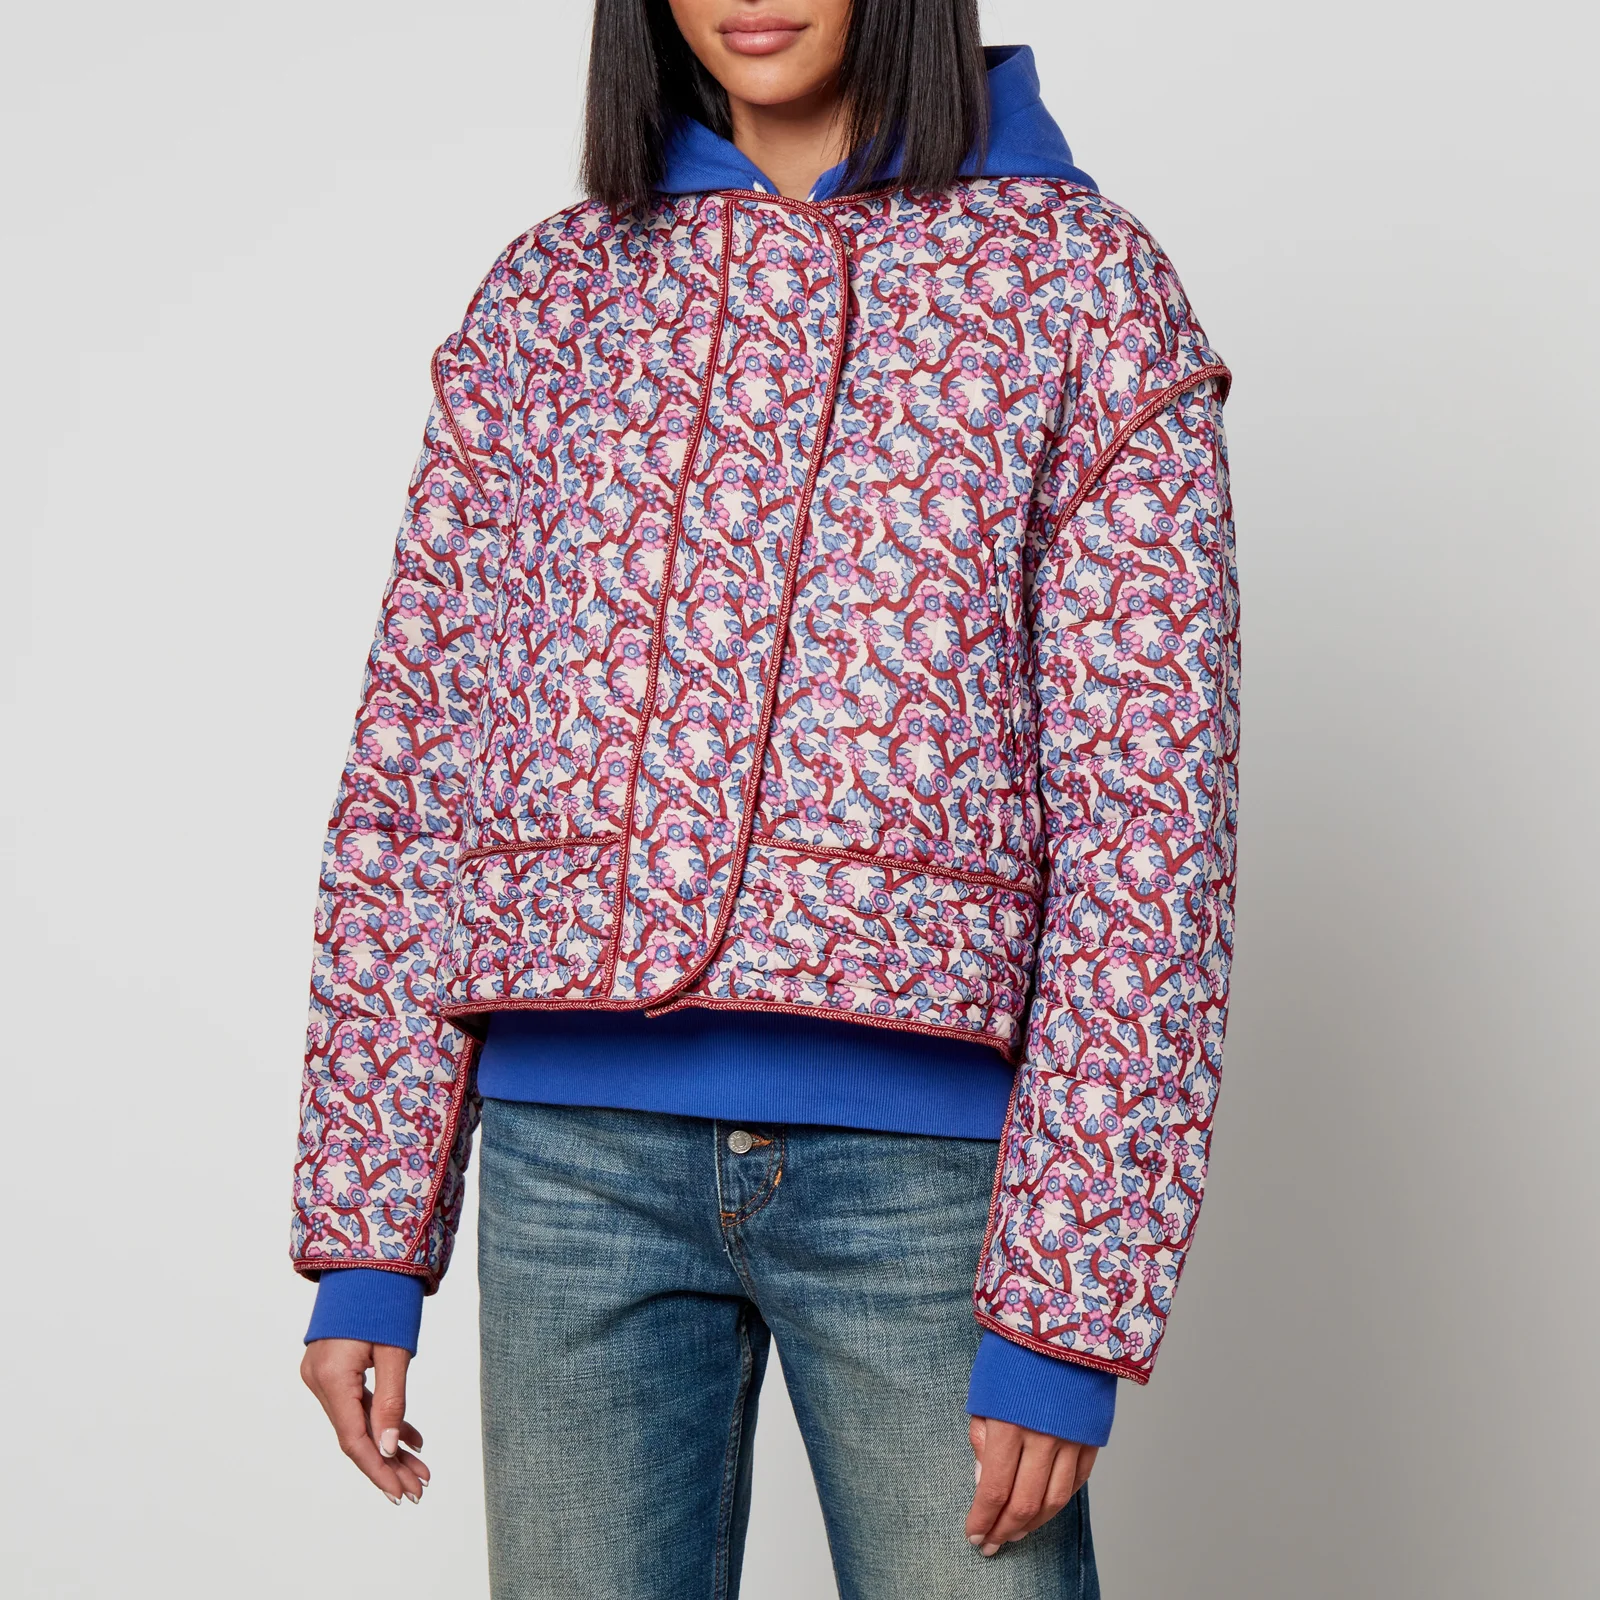 Marant Etoile Gelio Floral-Print Quilted Cotton Jacket Image 1